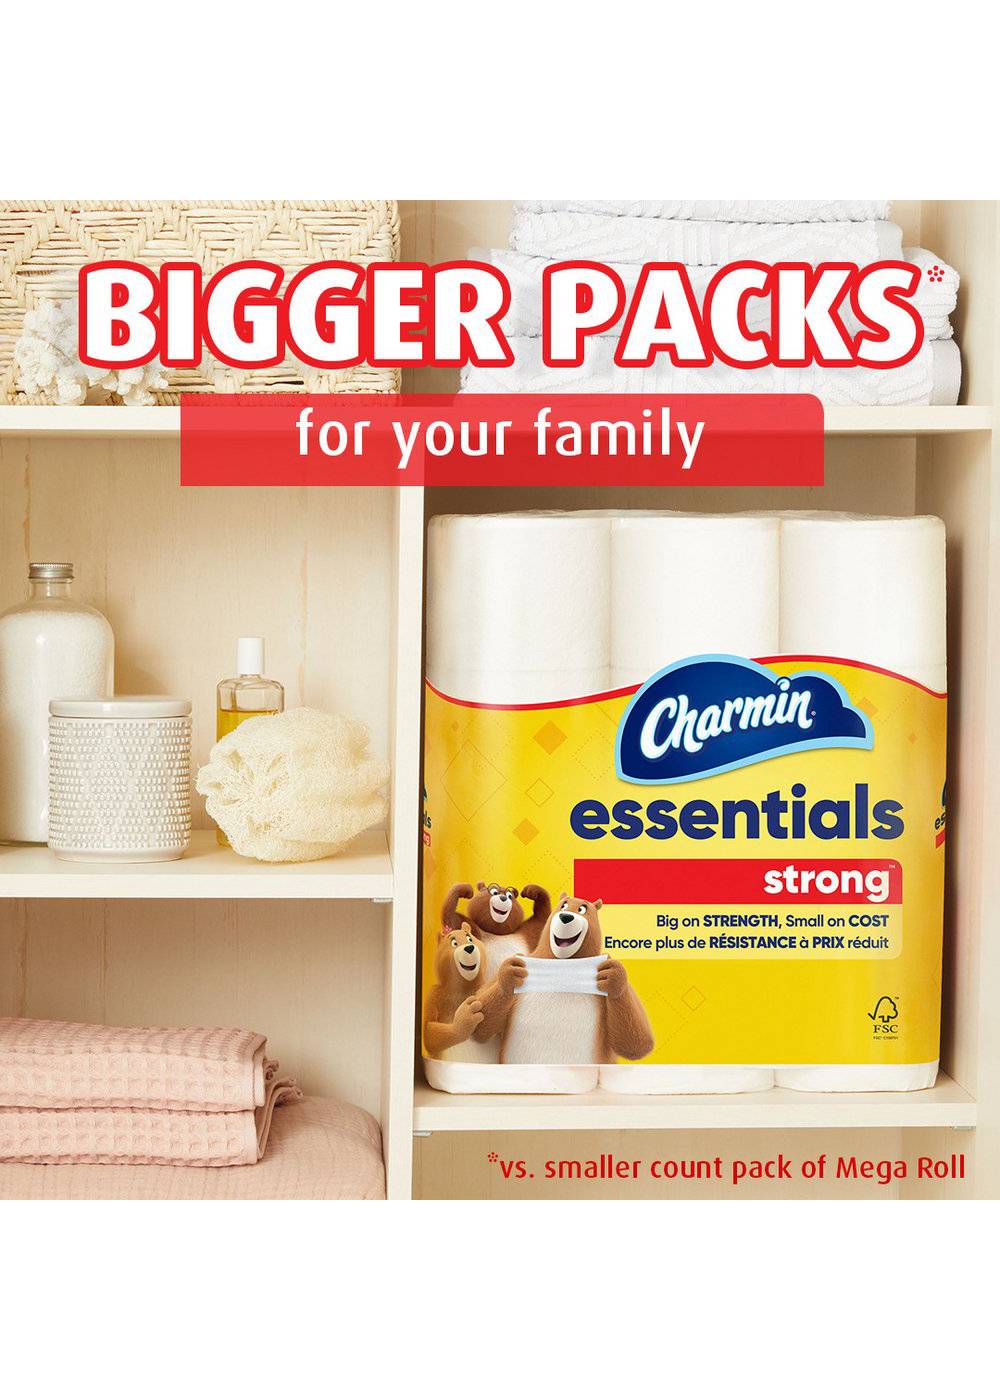 Charmin Essentials Strong Toilet Paper; image 5 of 6